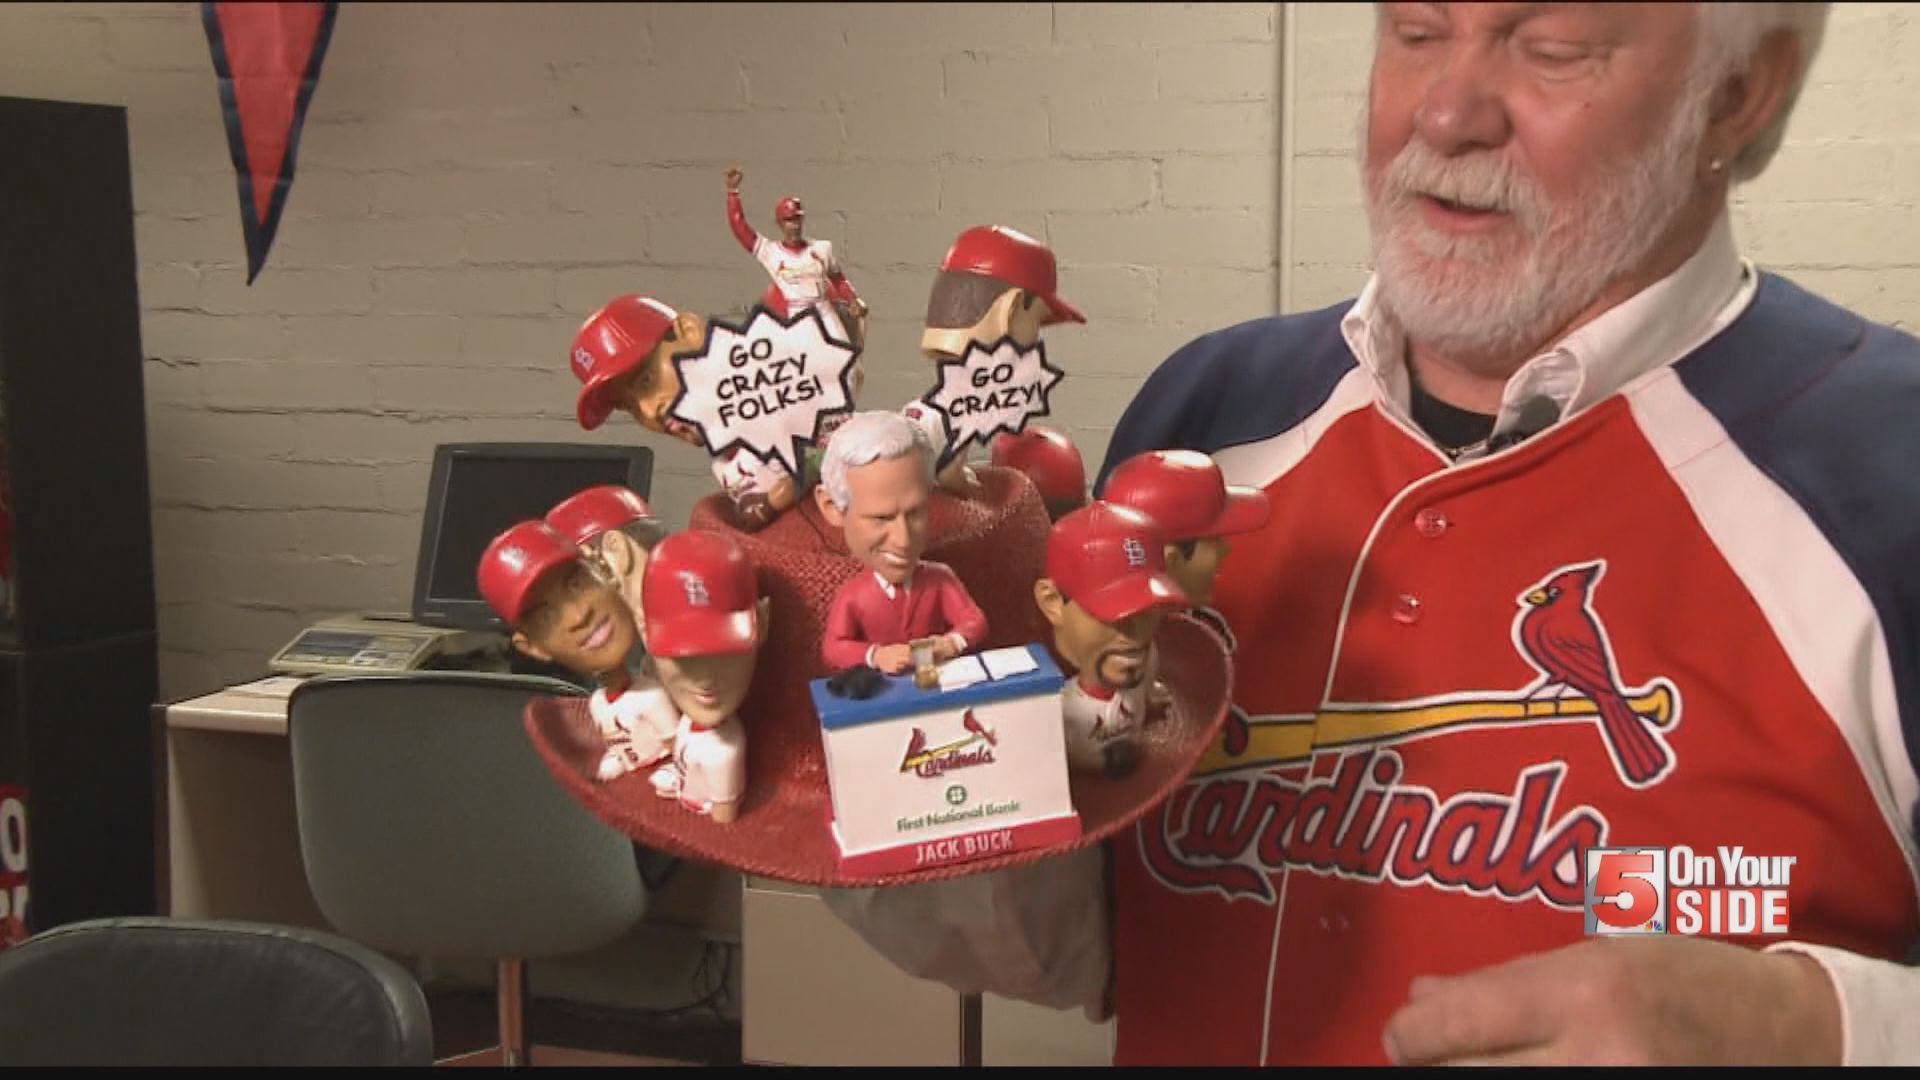 A career to hang his hat on: Cardinals superfan Tom 'The Hat Man' Lange  retires after 22 years at UMSL - UMSL Daily